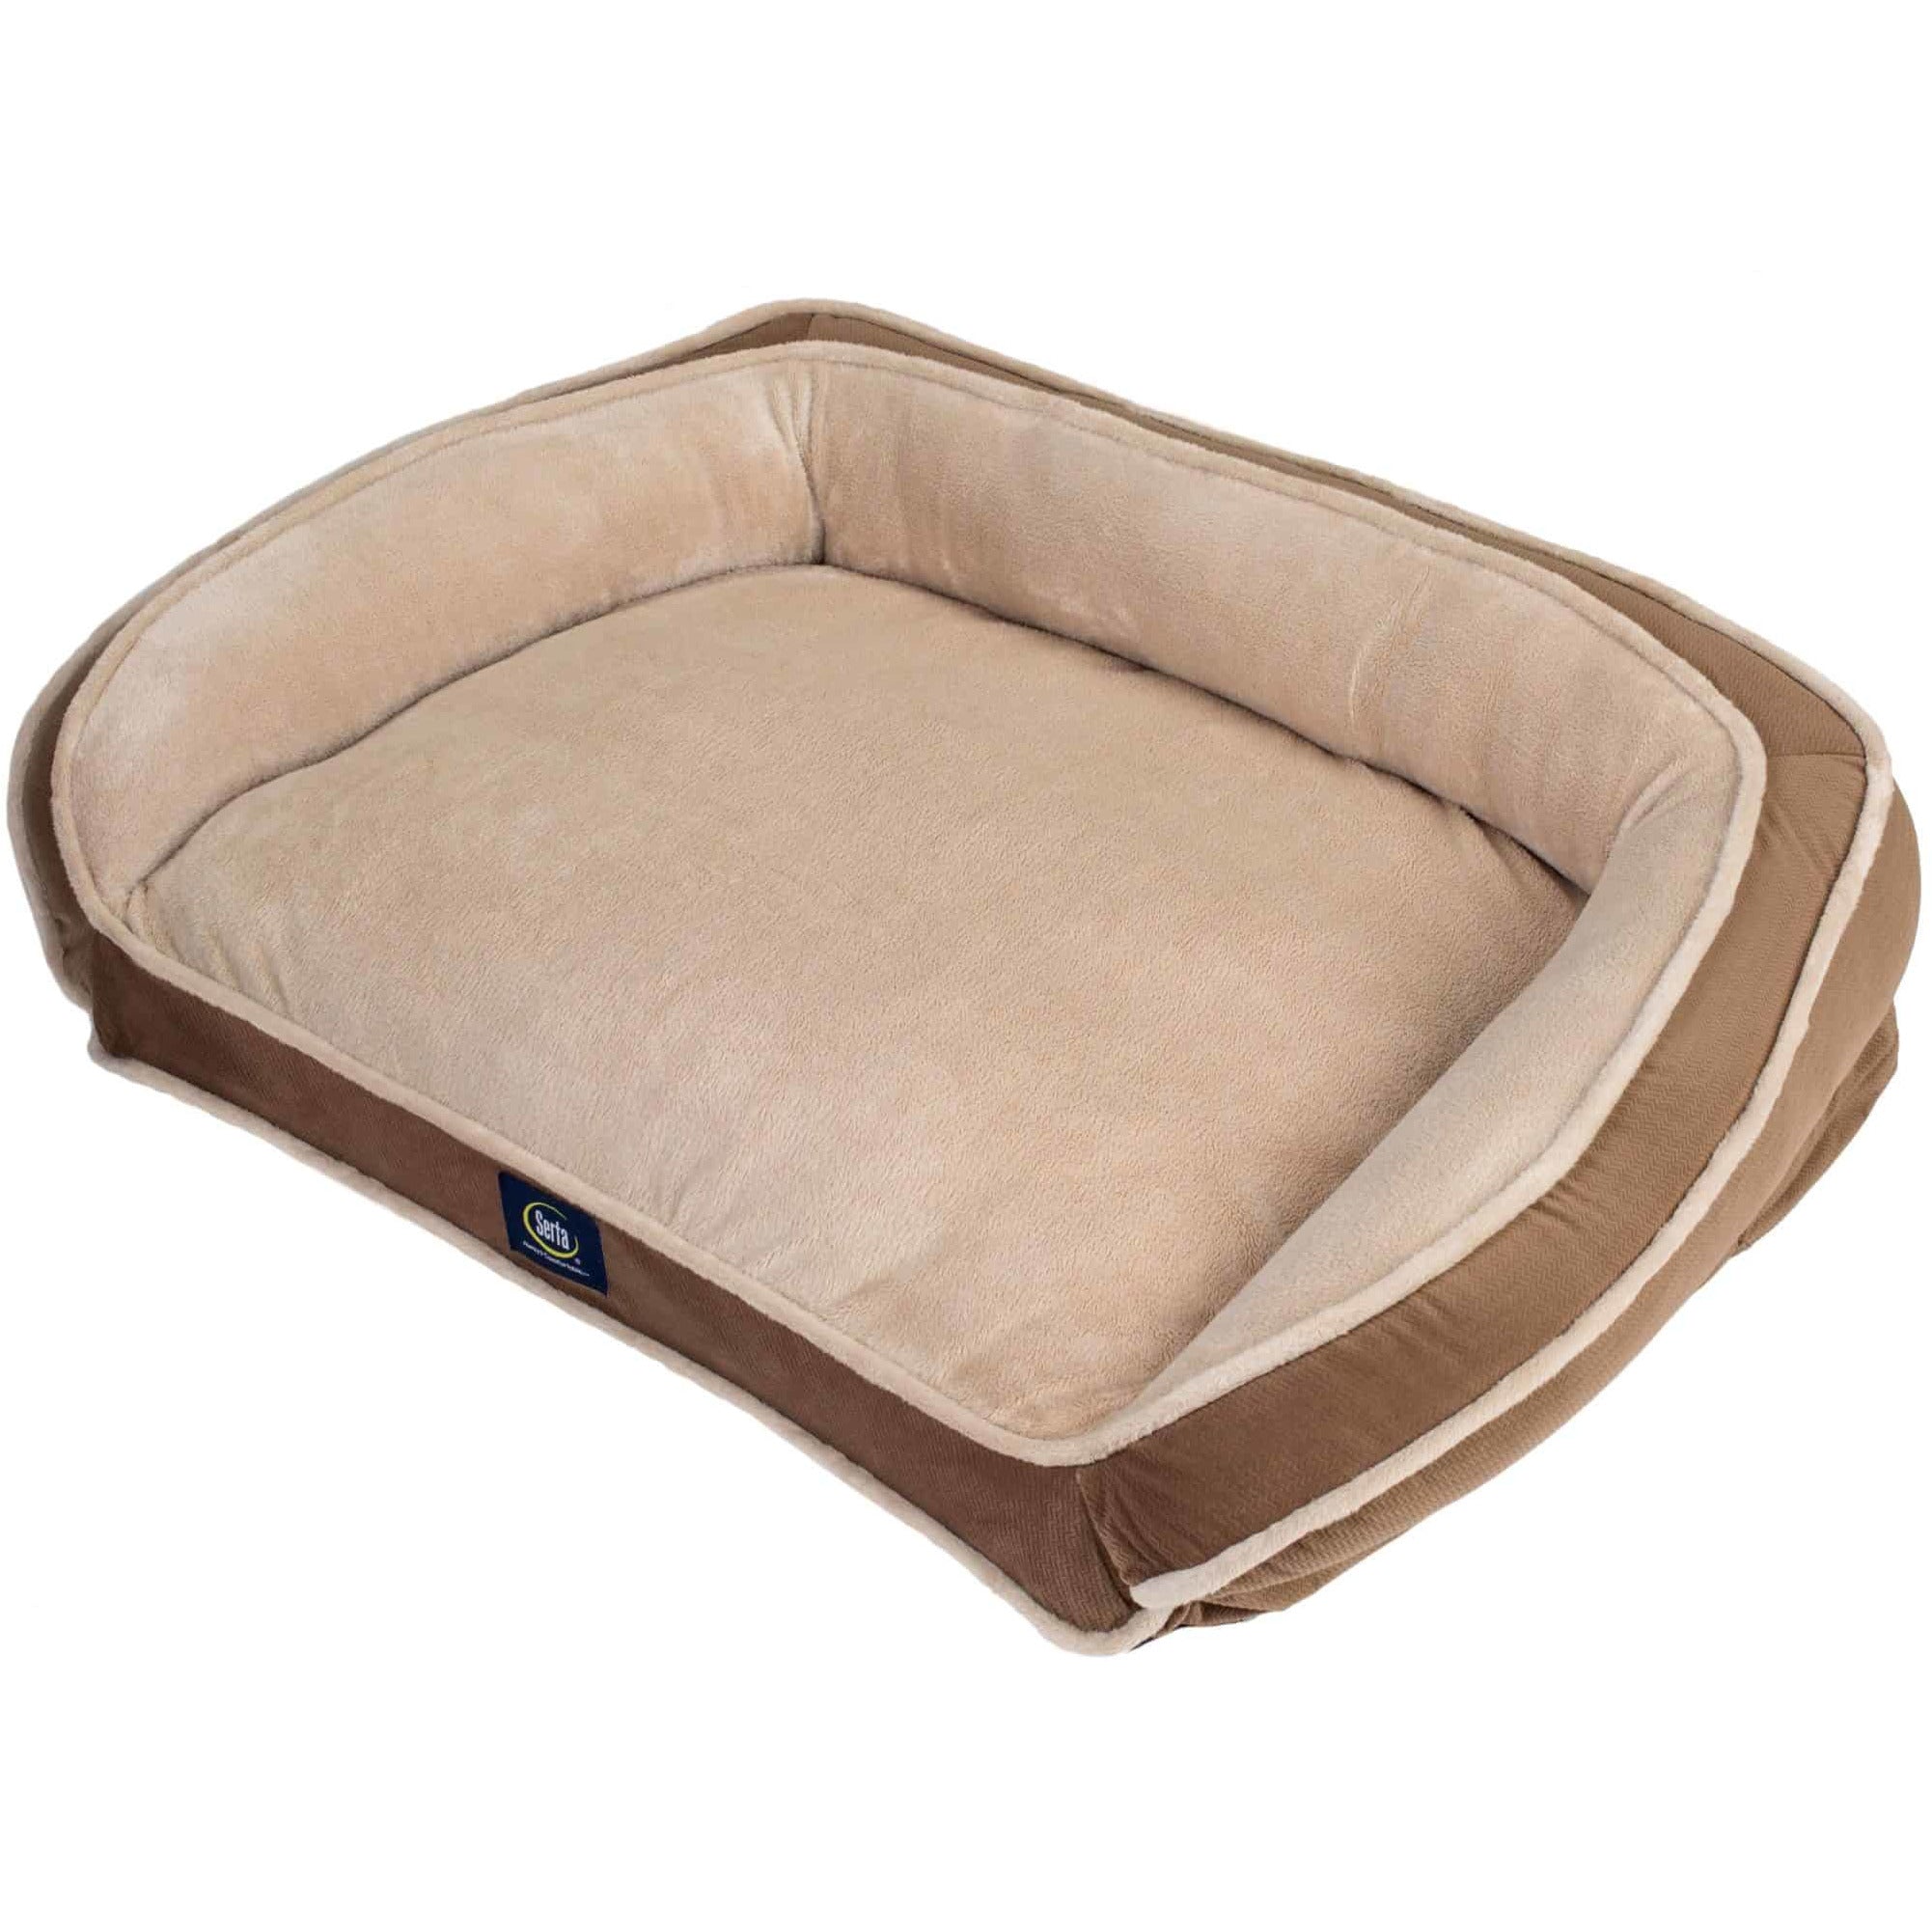 Serta Memory Foam Couch Pet Dog Bed, Large, Color May Vary